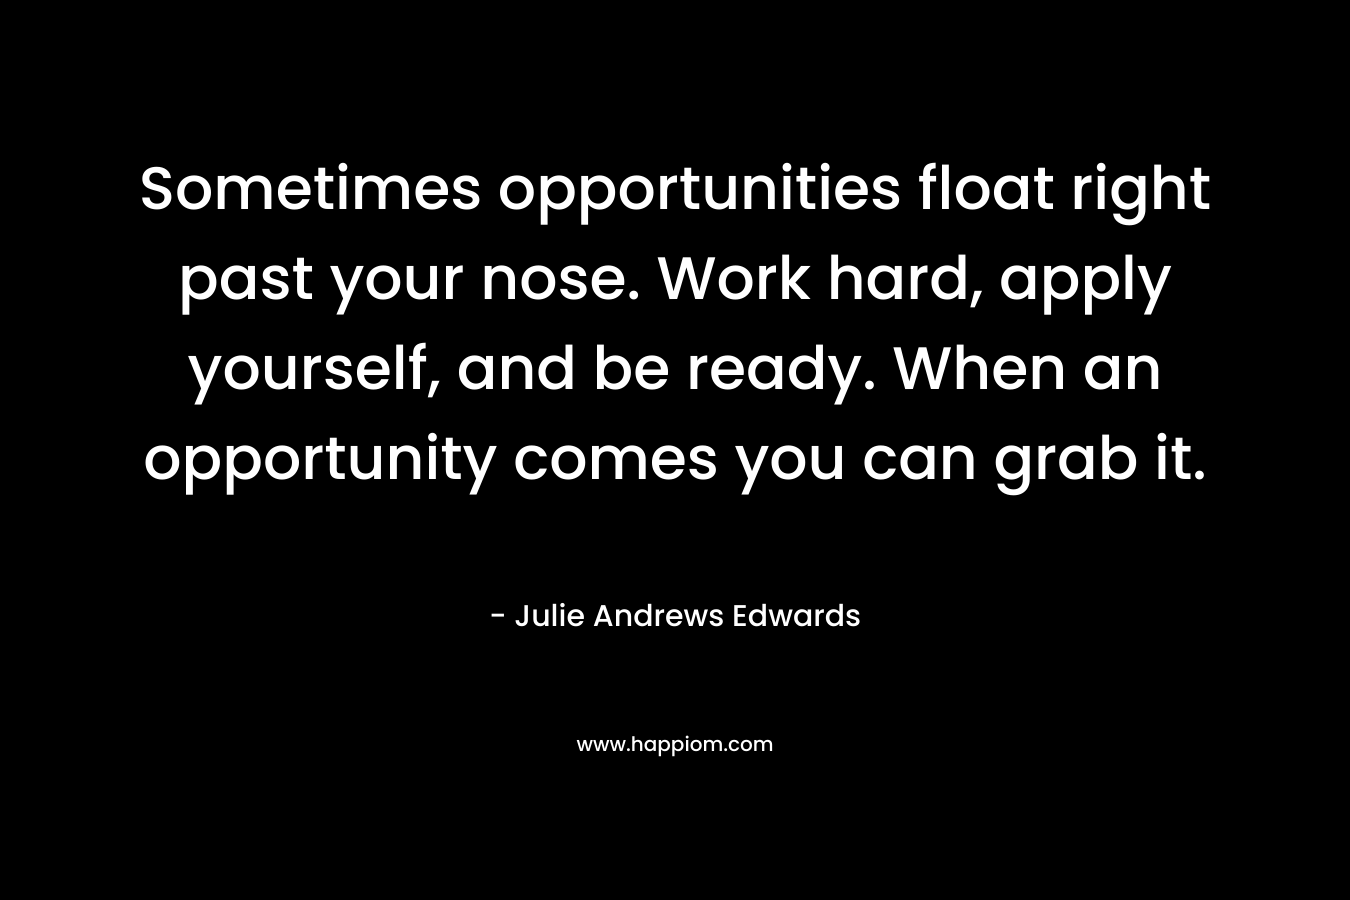 Sometimes opportunities float right past your nose. Work hard, apply yourself, and be ready. When an opportunity comes you can grab it.